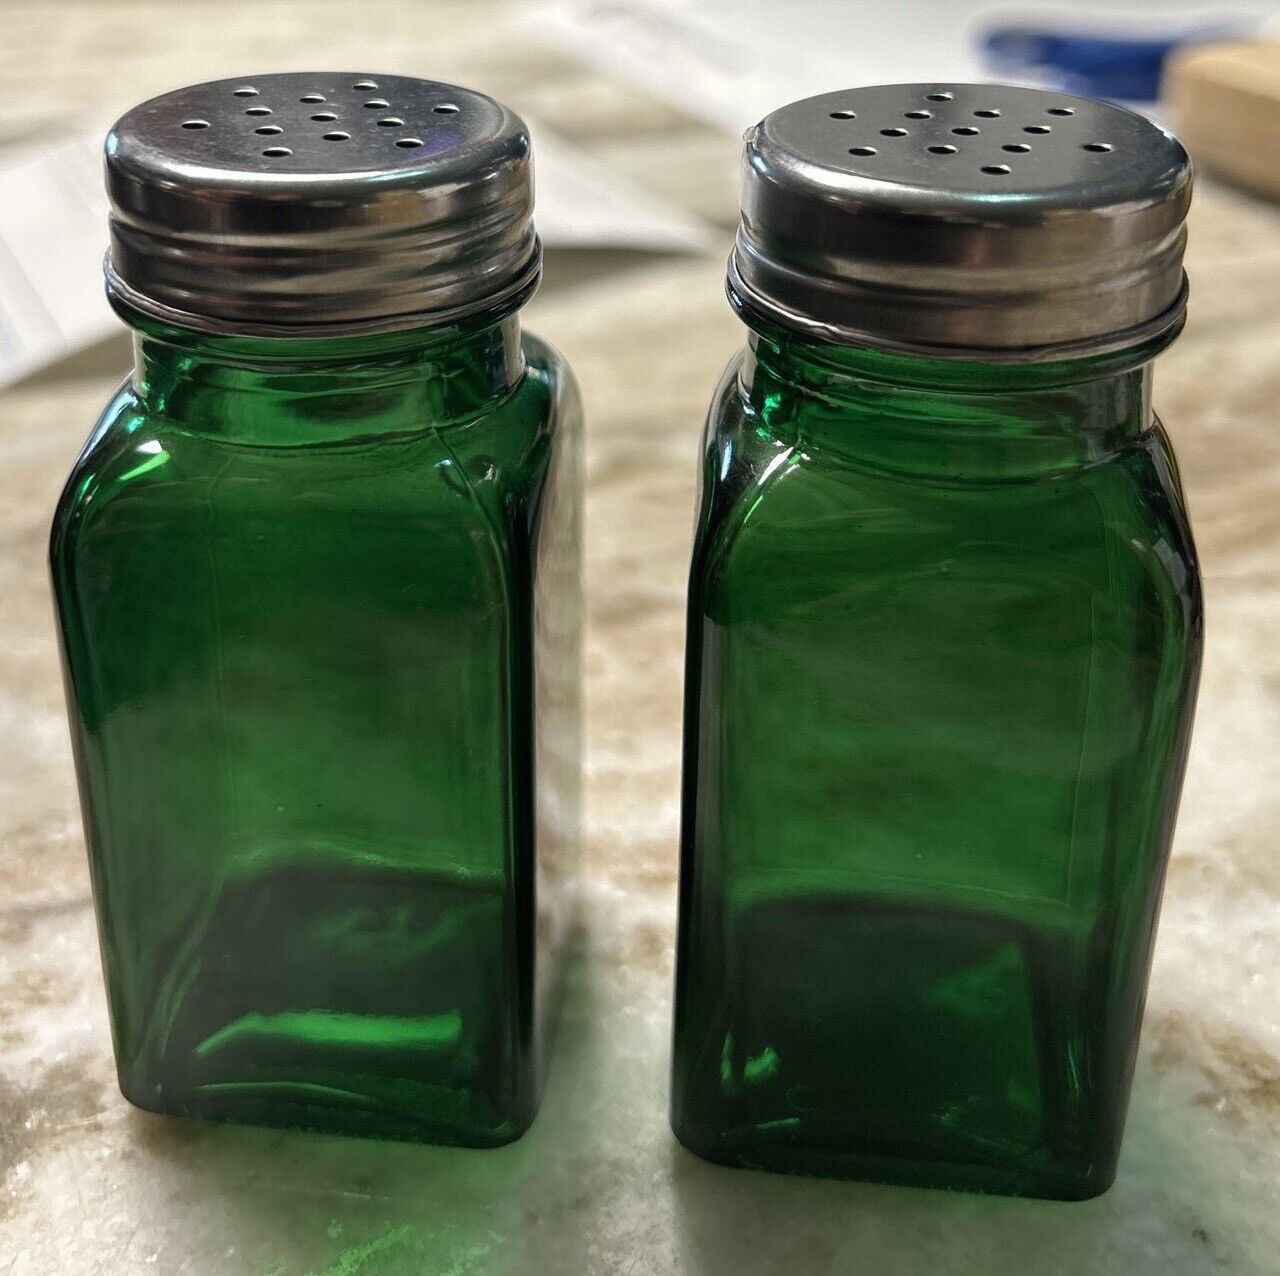 2 Green Glass  For Salt/Pepper/spices Shakers w/ Metal Lids 2 Oz  “Retro Look”